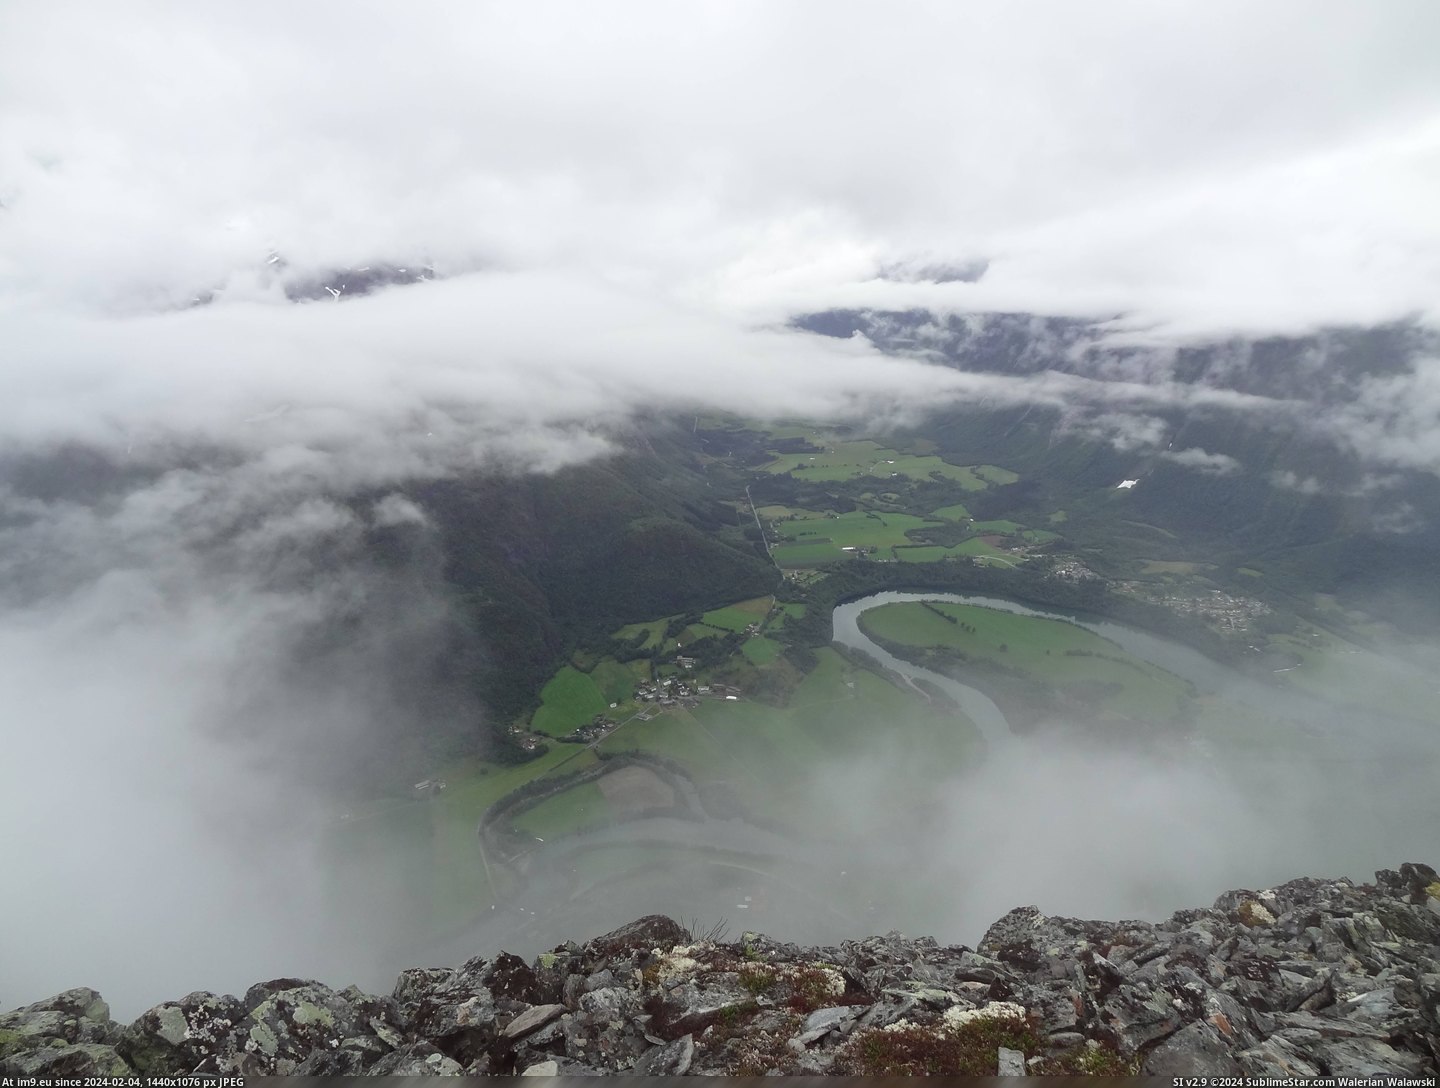 #Valley #4608x3456 #Ridge #Clouds [Earthporn]  Looking through the clouds to the valley below, on the Romsdalseggen Ridge [4608x3456] Pic. (Obraz z album My r/EARTHPORN favs))